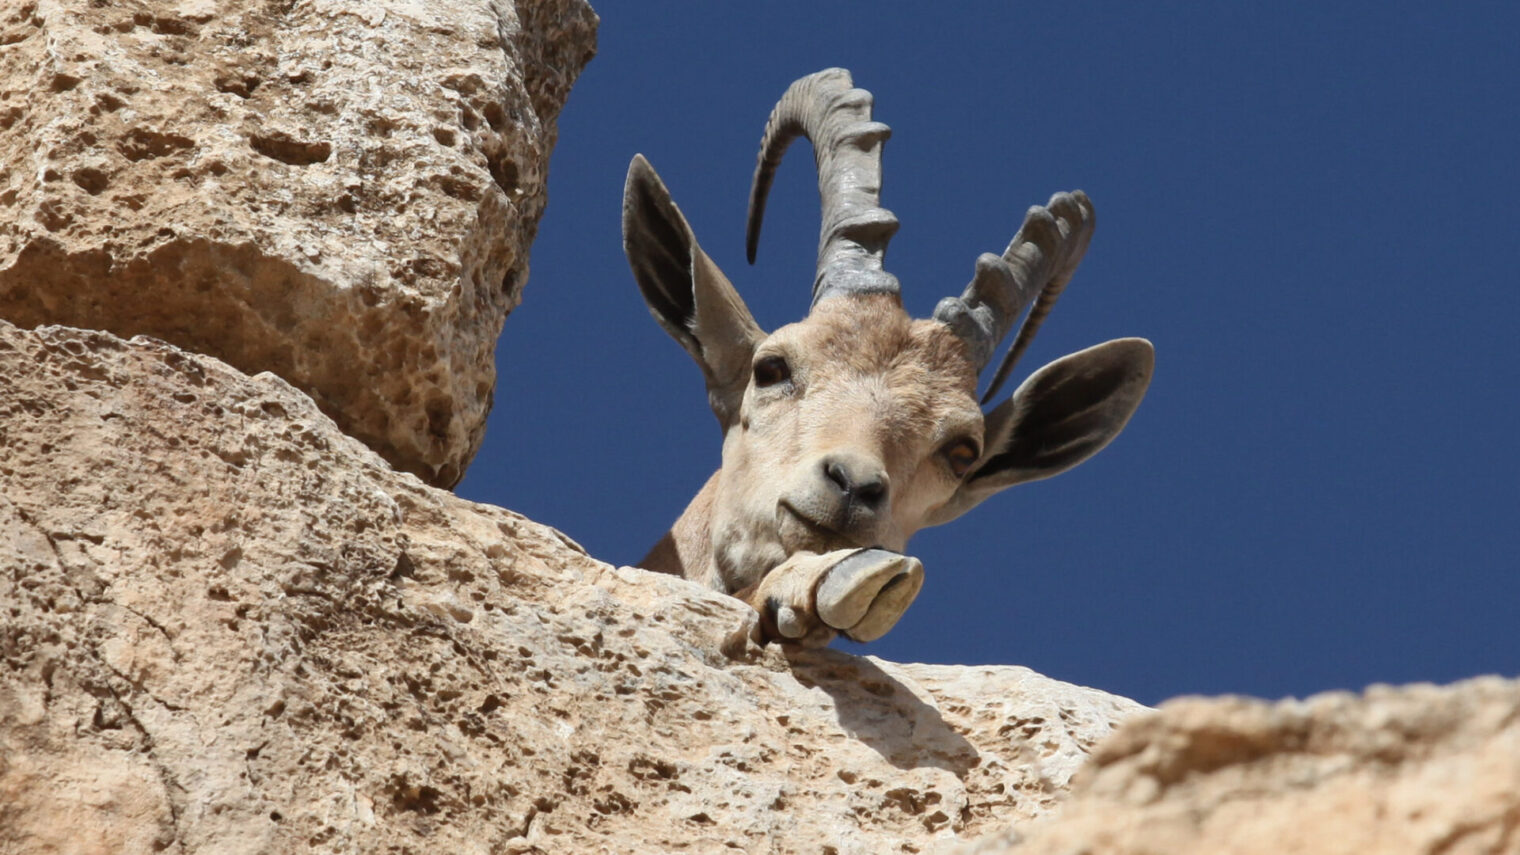 A Nubian ibex on the cliffs In Ramon crater. Photo by Yossi Zamir/Flash 90